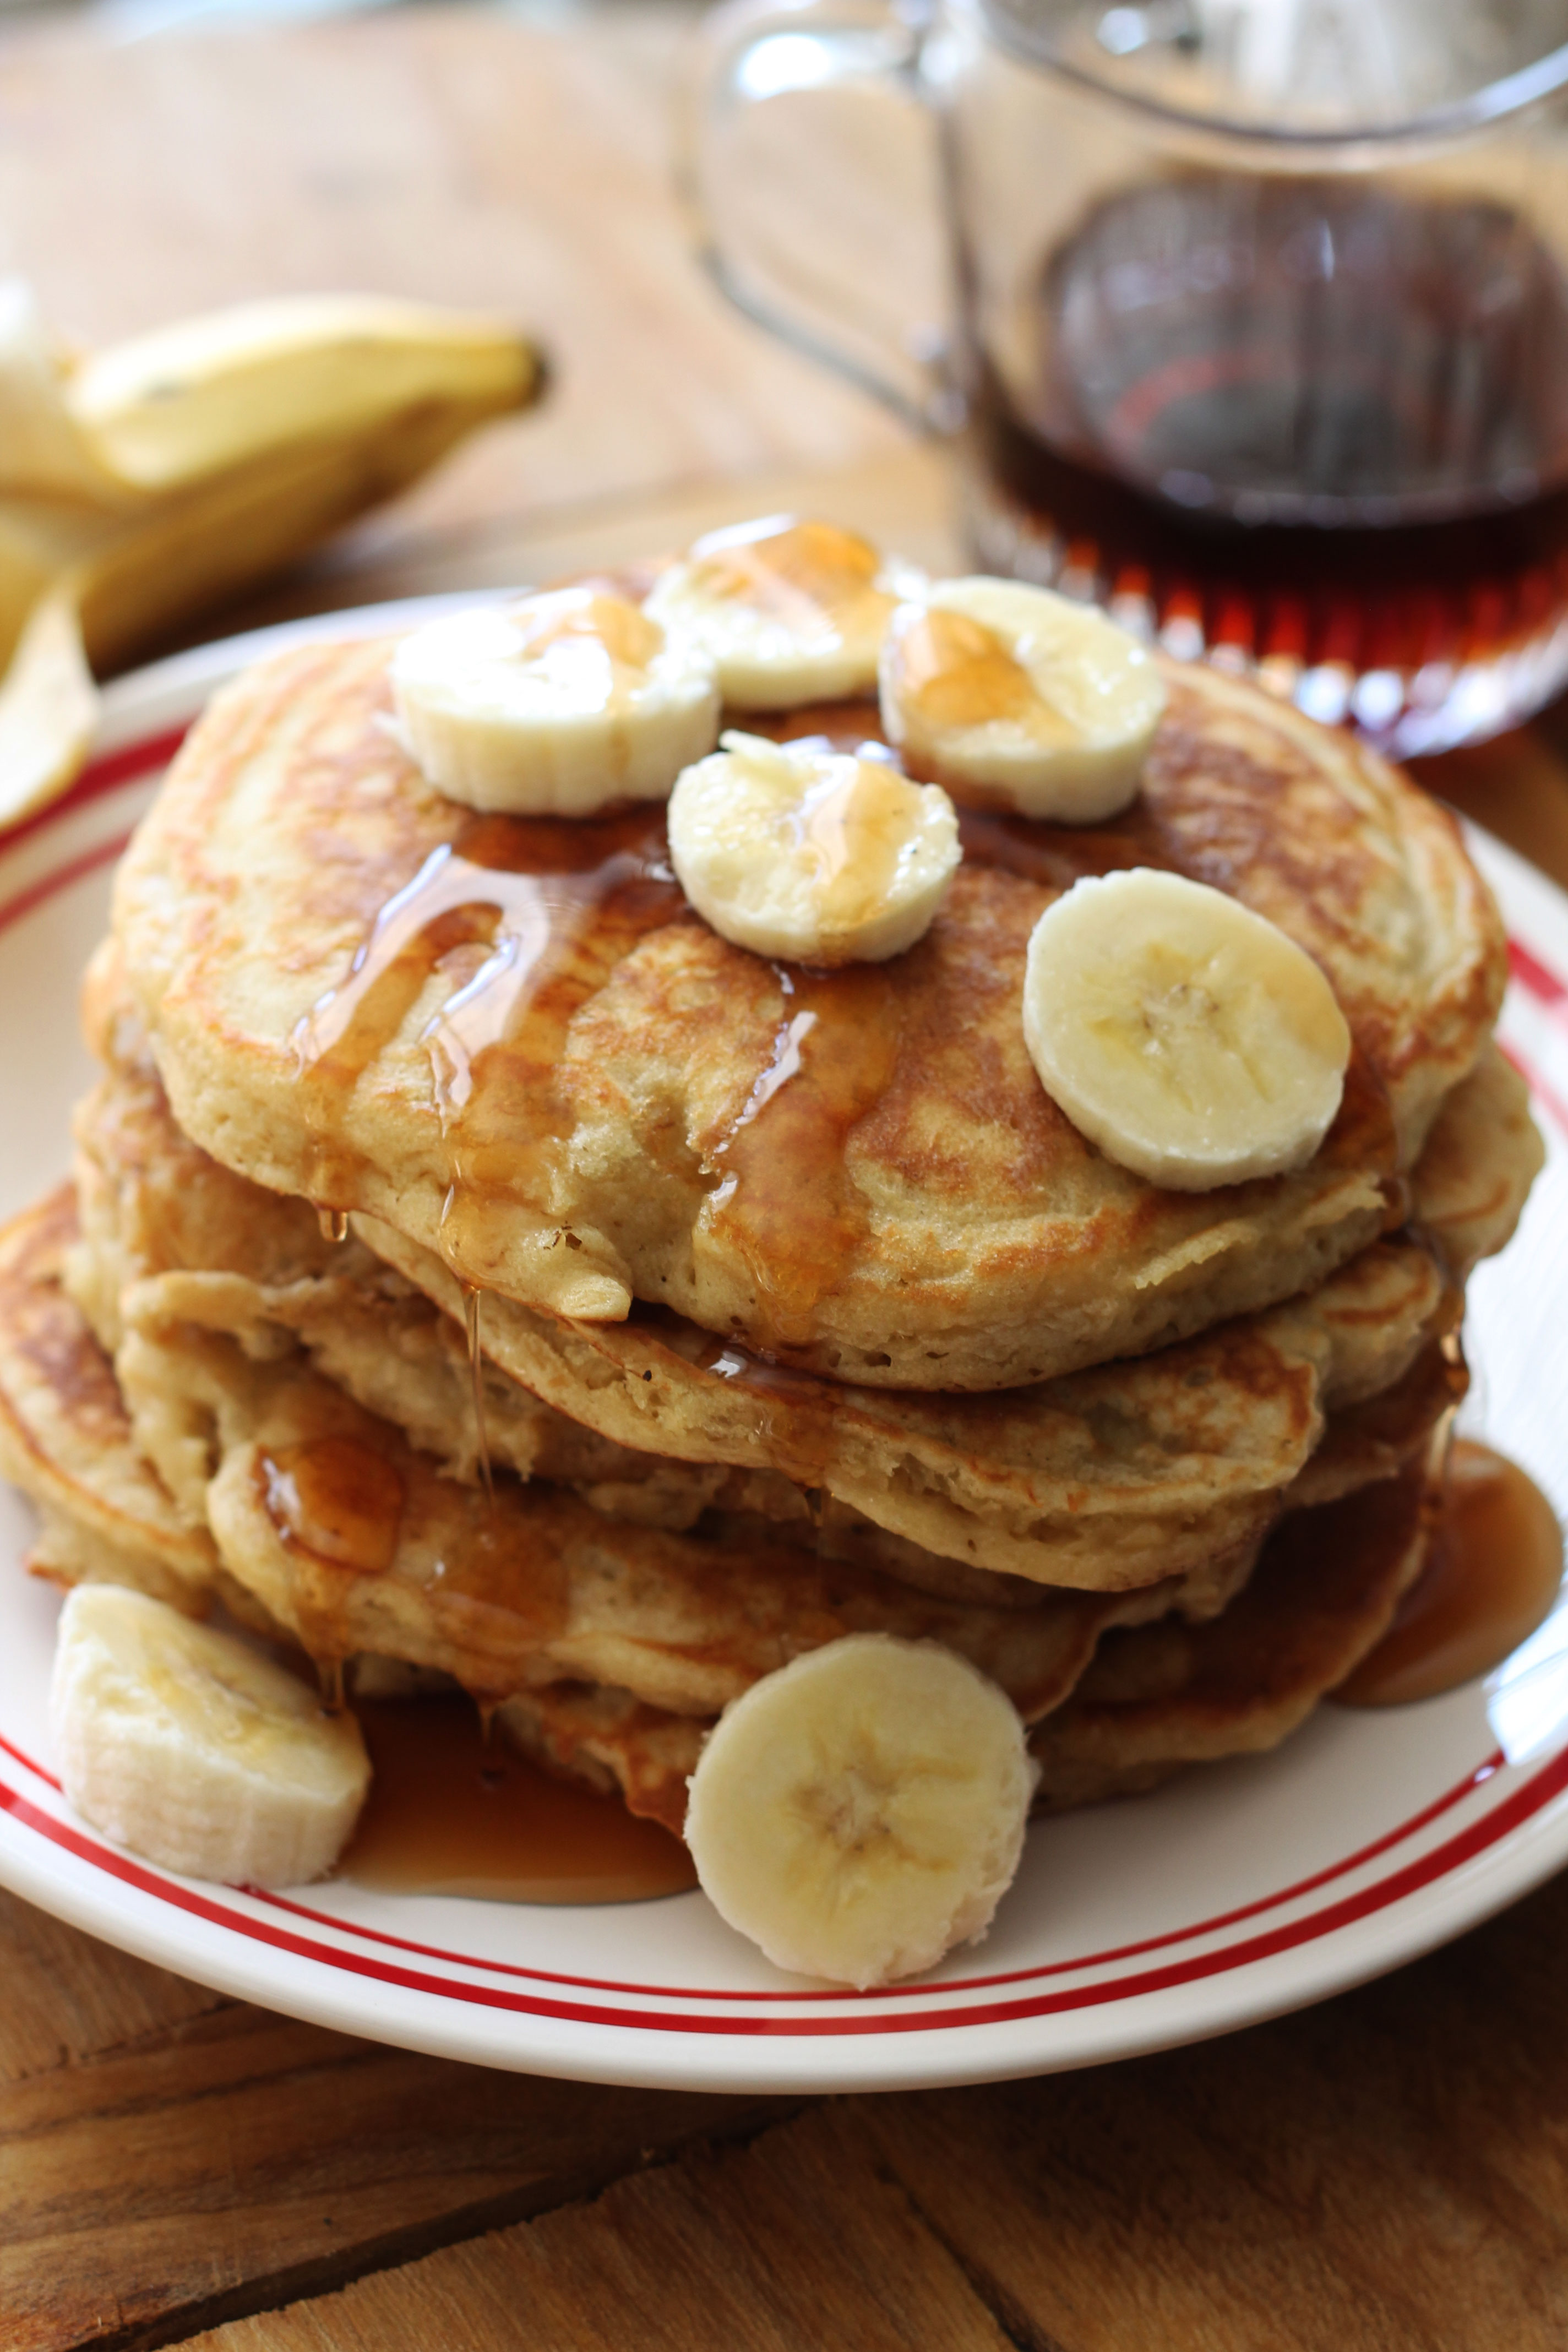 The best Banana Pancakes! Fluffy, light and the perfect way to start your day!